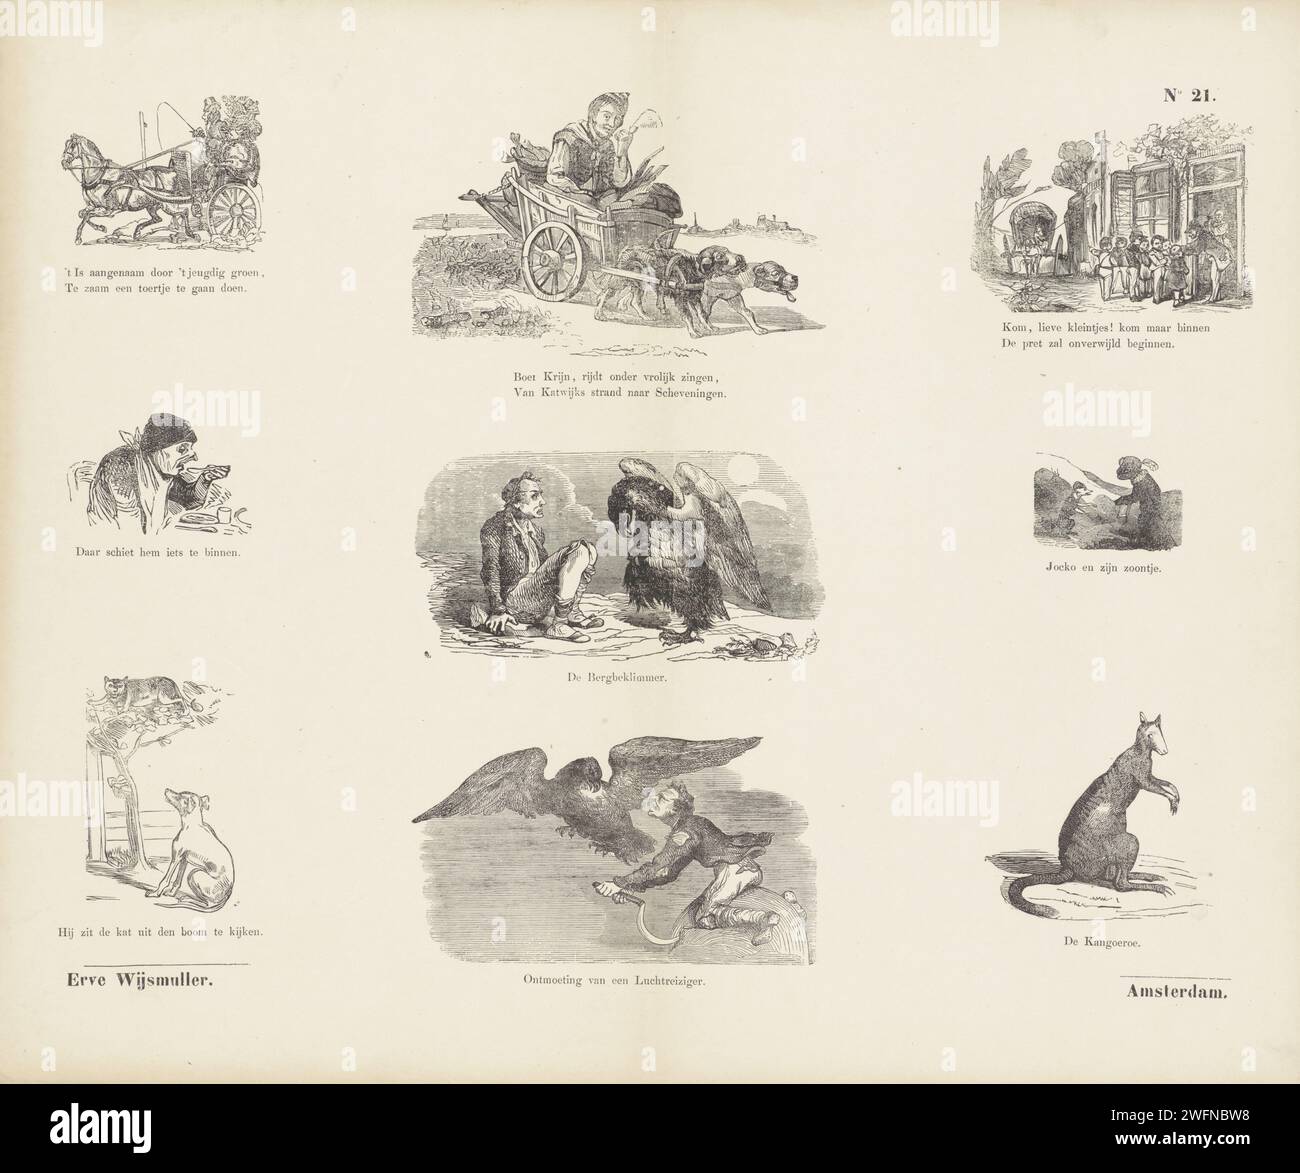 Different performances, Erve Wijsmuller, c. 1828 - c. 1913 print Leaf with 9 performances of different nature, including a eating man, a dog looking a cat from the tree and a kangaroo. A caption under each image. Under the first image The caption: 't is pleasant by doing the youthful greenery, / to do a tour. Numbered at the top right: No. 21. publisher: Amsterdamprint maker: Netherlands paper letterpress printing animals acting as human beings. cat. dog. eating and drinking Stock Photo